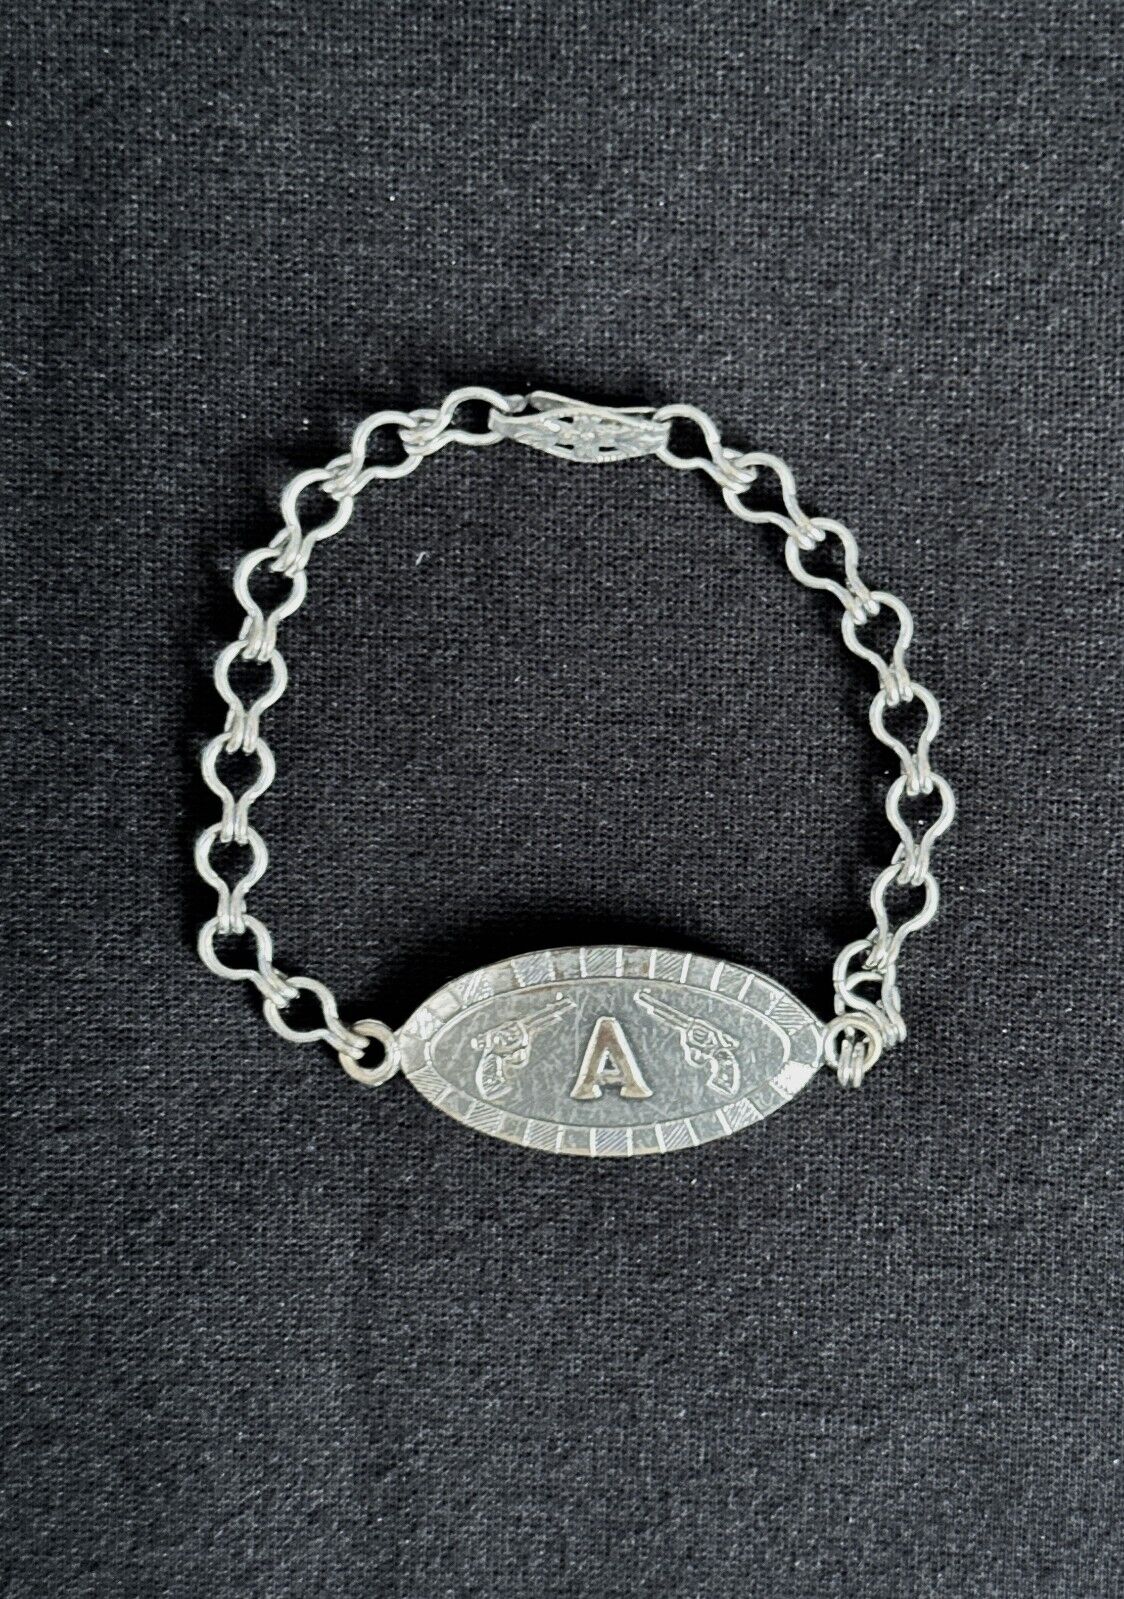 Vintage 1940s Tom Mix Ralston Straight Shooters ID Bracelet Initial \